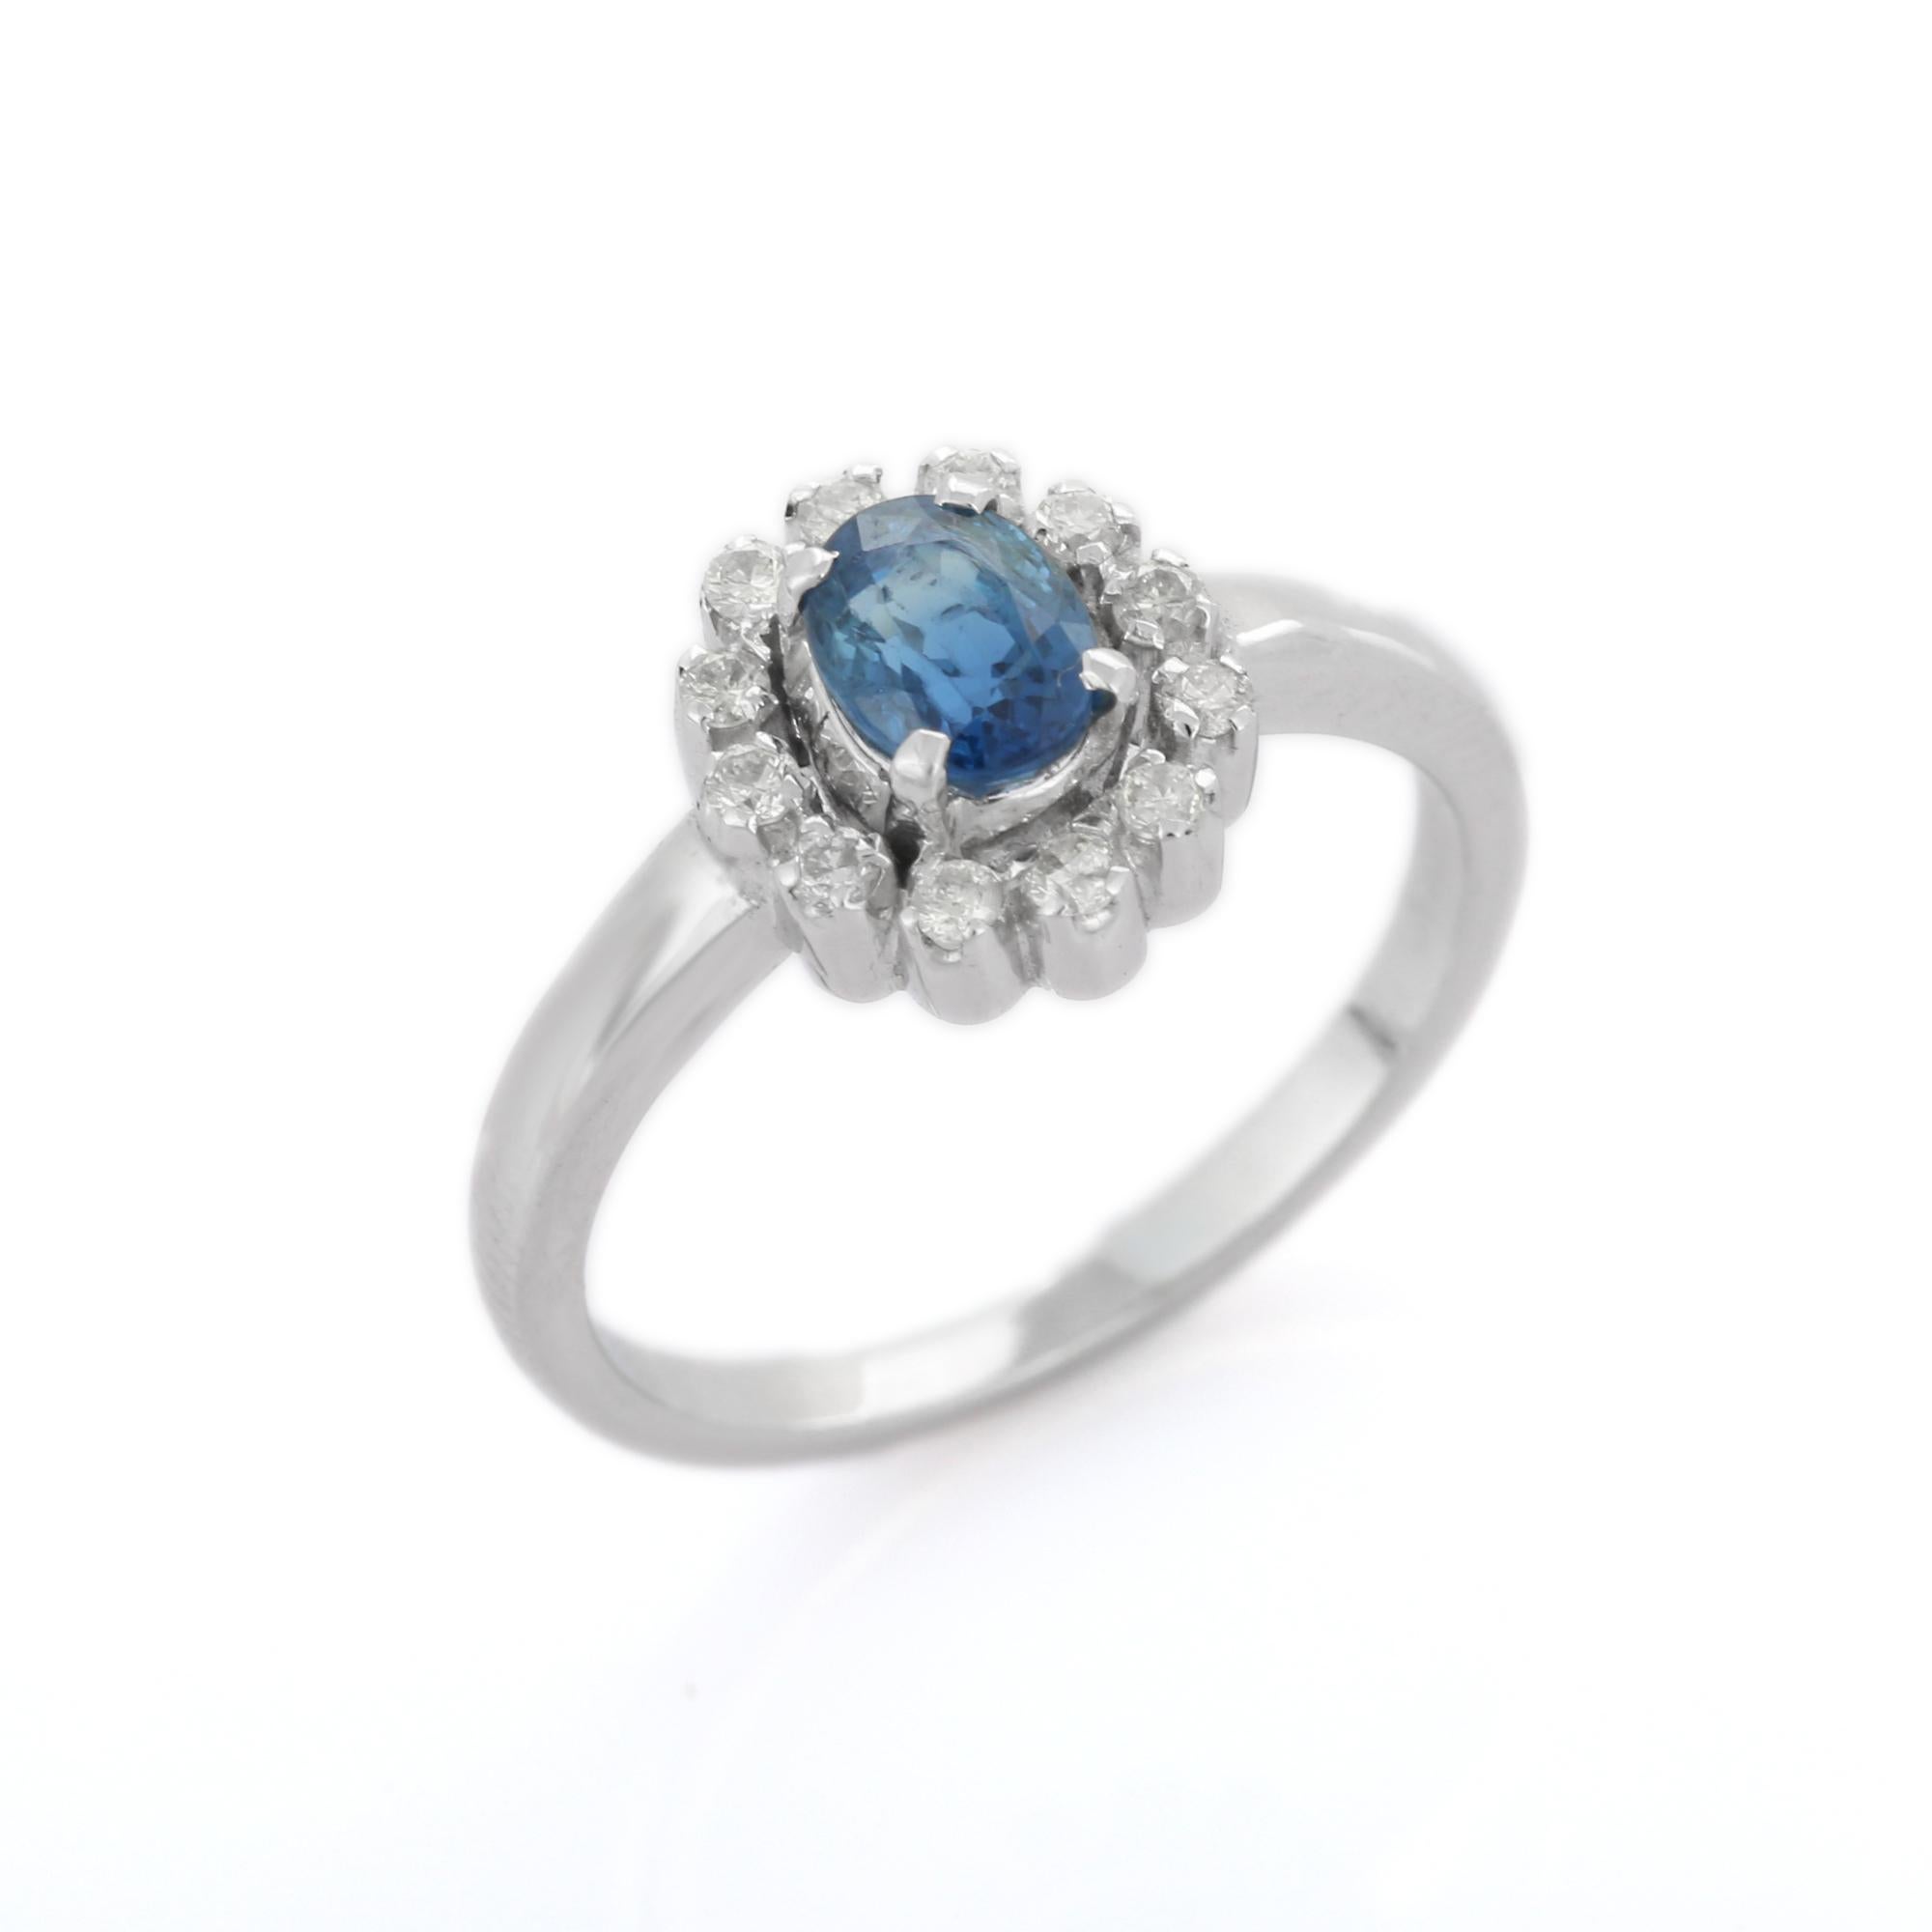 For Sale:  14K White Gold Halo Diamond and Sapphire Ring, Sapphire Diamond Halo Ring 5